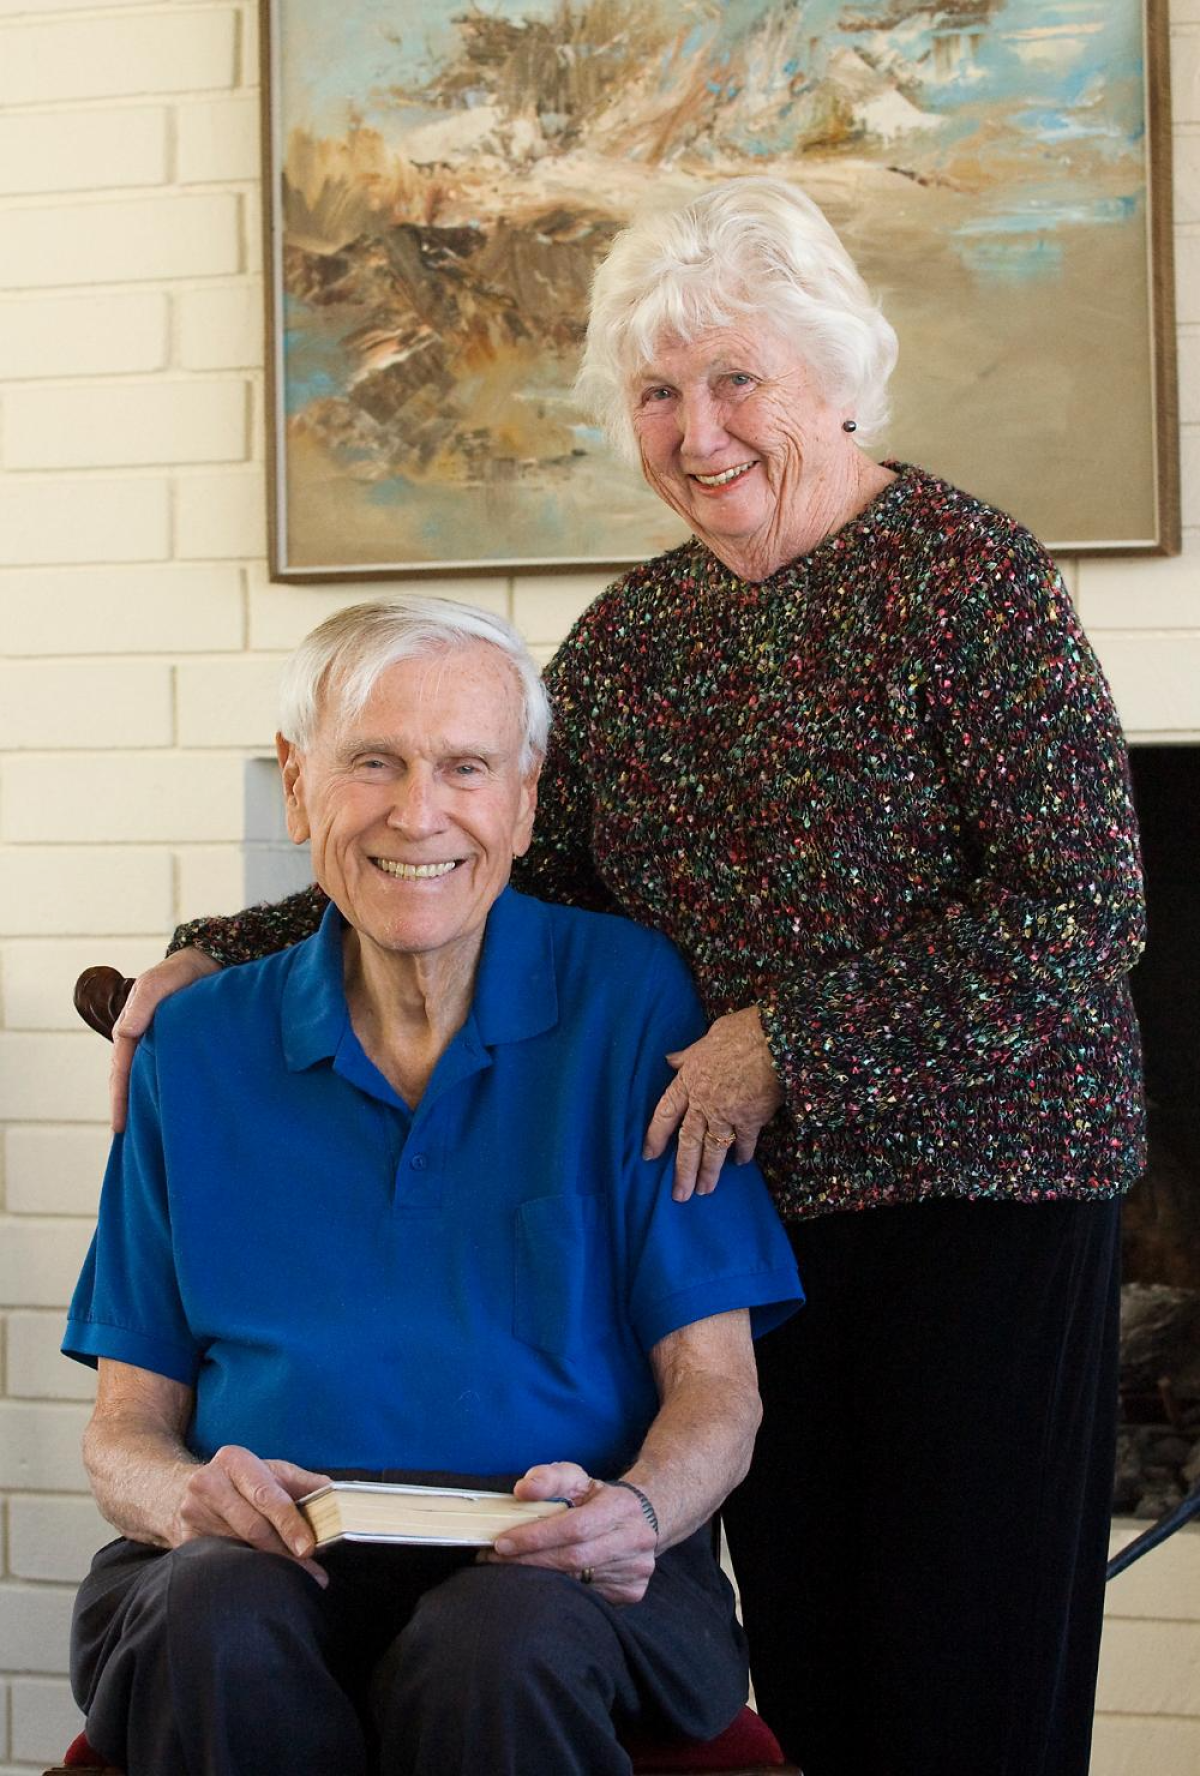 Ralph Bauer and his wife Charlene, pictured in 2011, recently celebrated their 70th wedding anniversary.